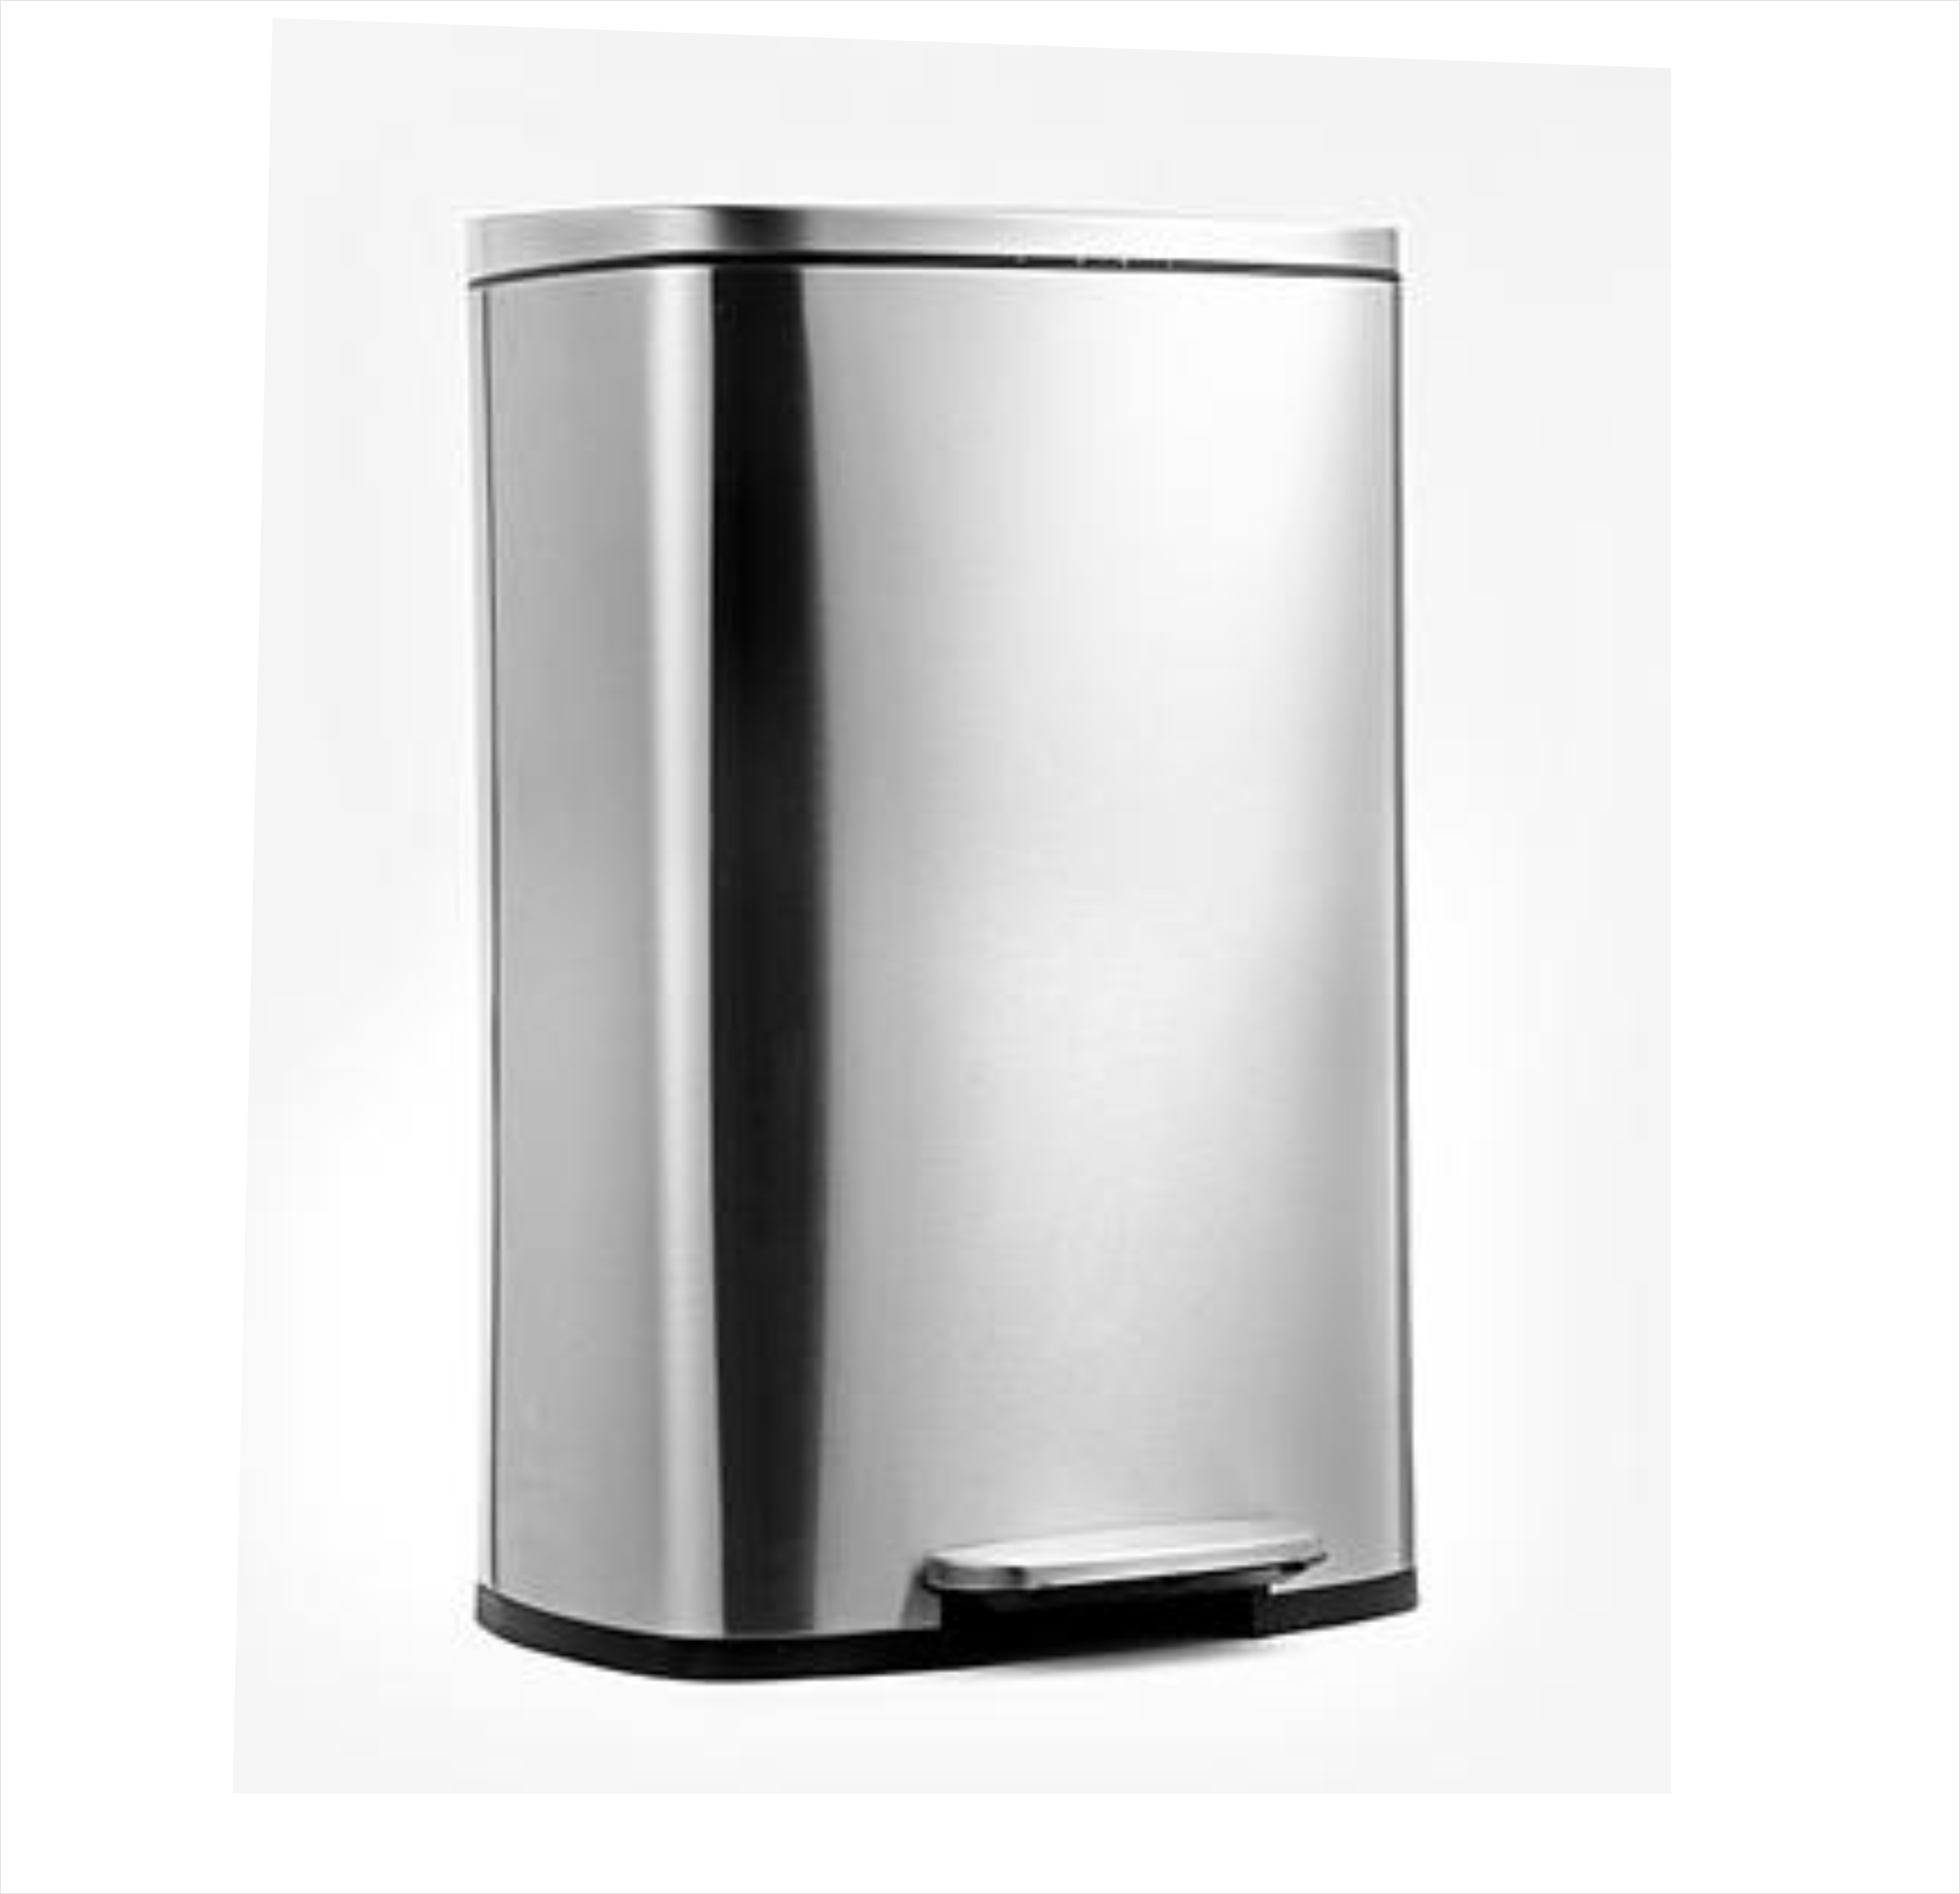 50Liter Pedal Control Stainless Steel Trash Can with soft close